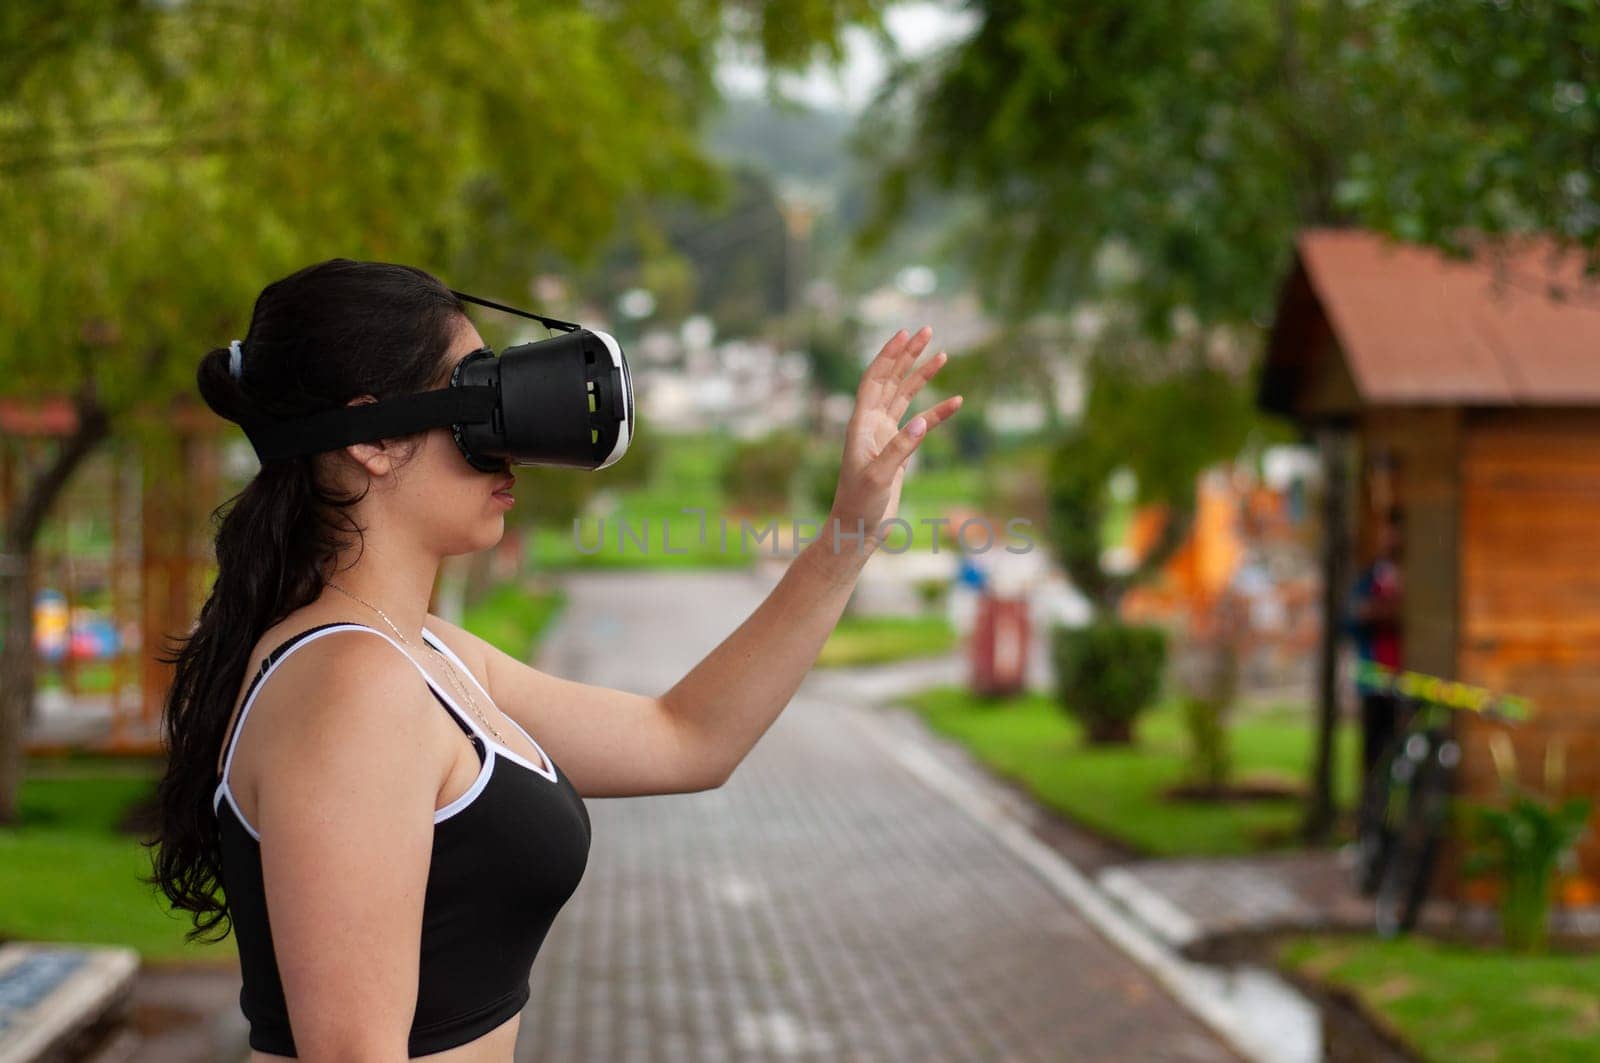 young girl in a park wearing augmented reality glasses with her hand raised touching a reality that does not exist. by Raulmartin